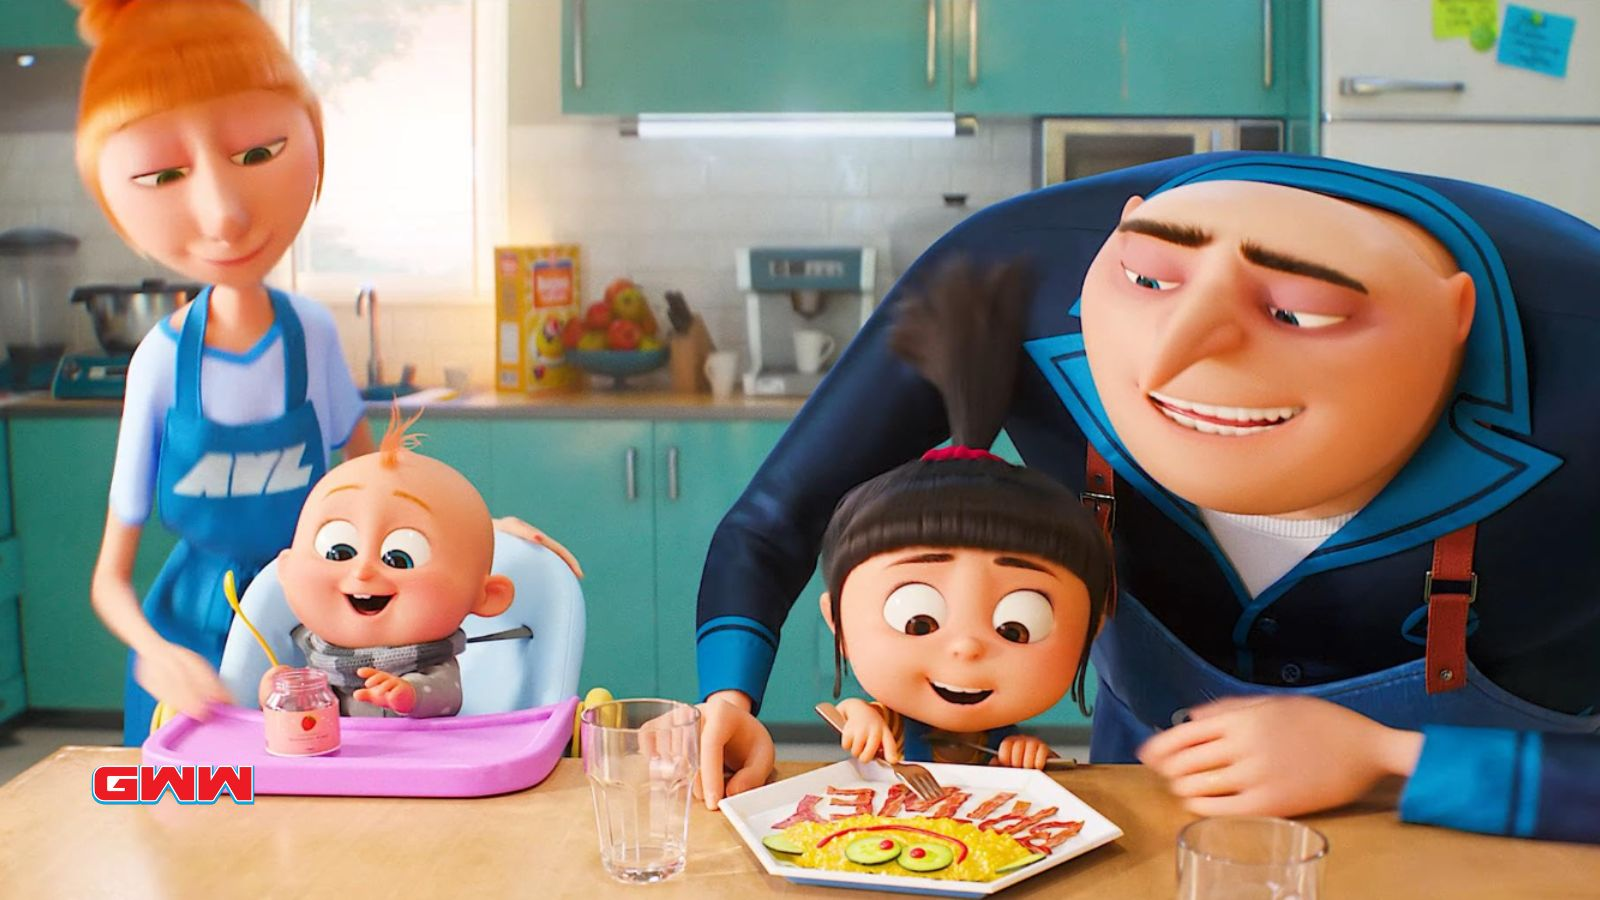 Gru and Lucy feeding their kids, Despicable Me 4 Release Date